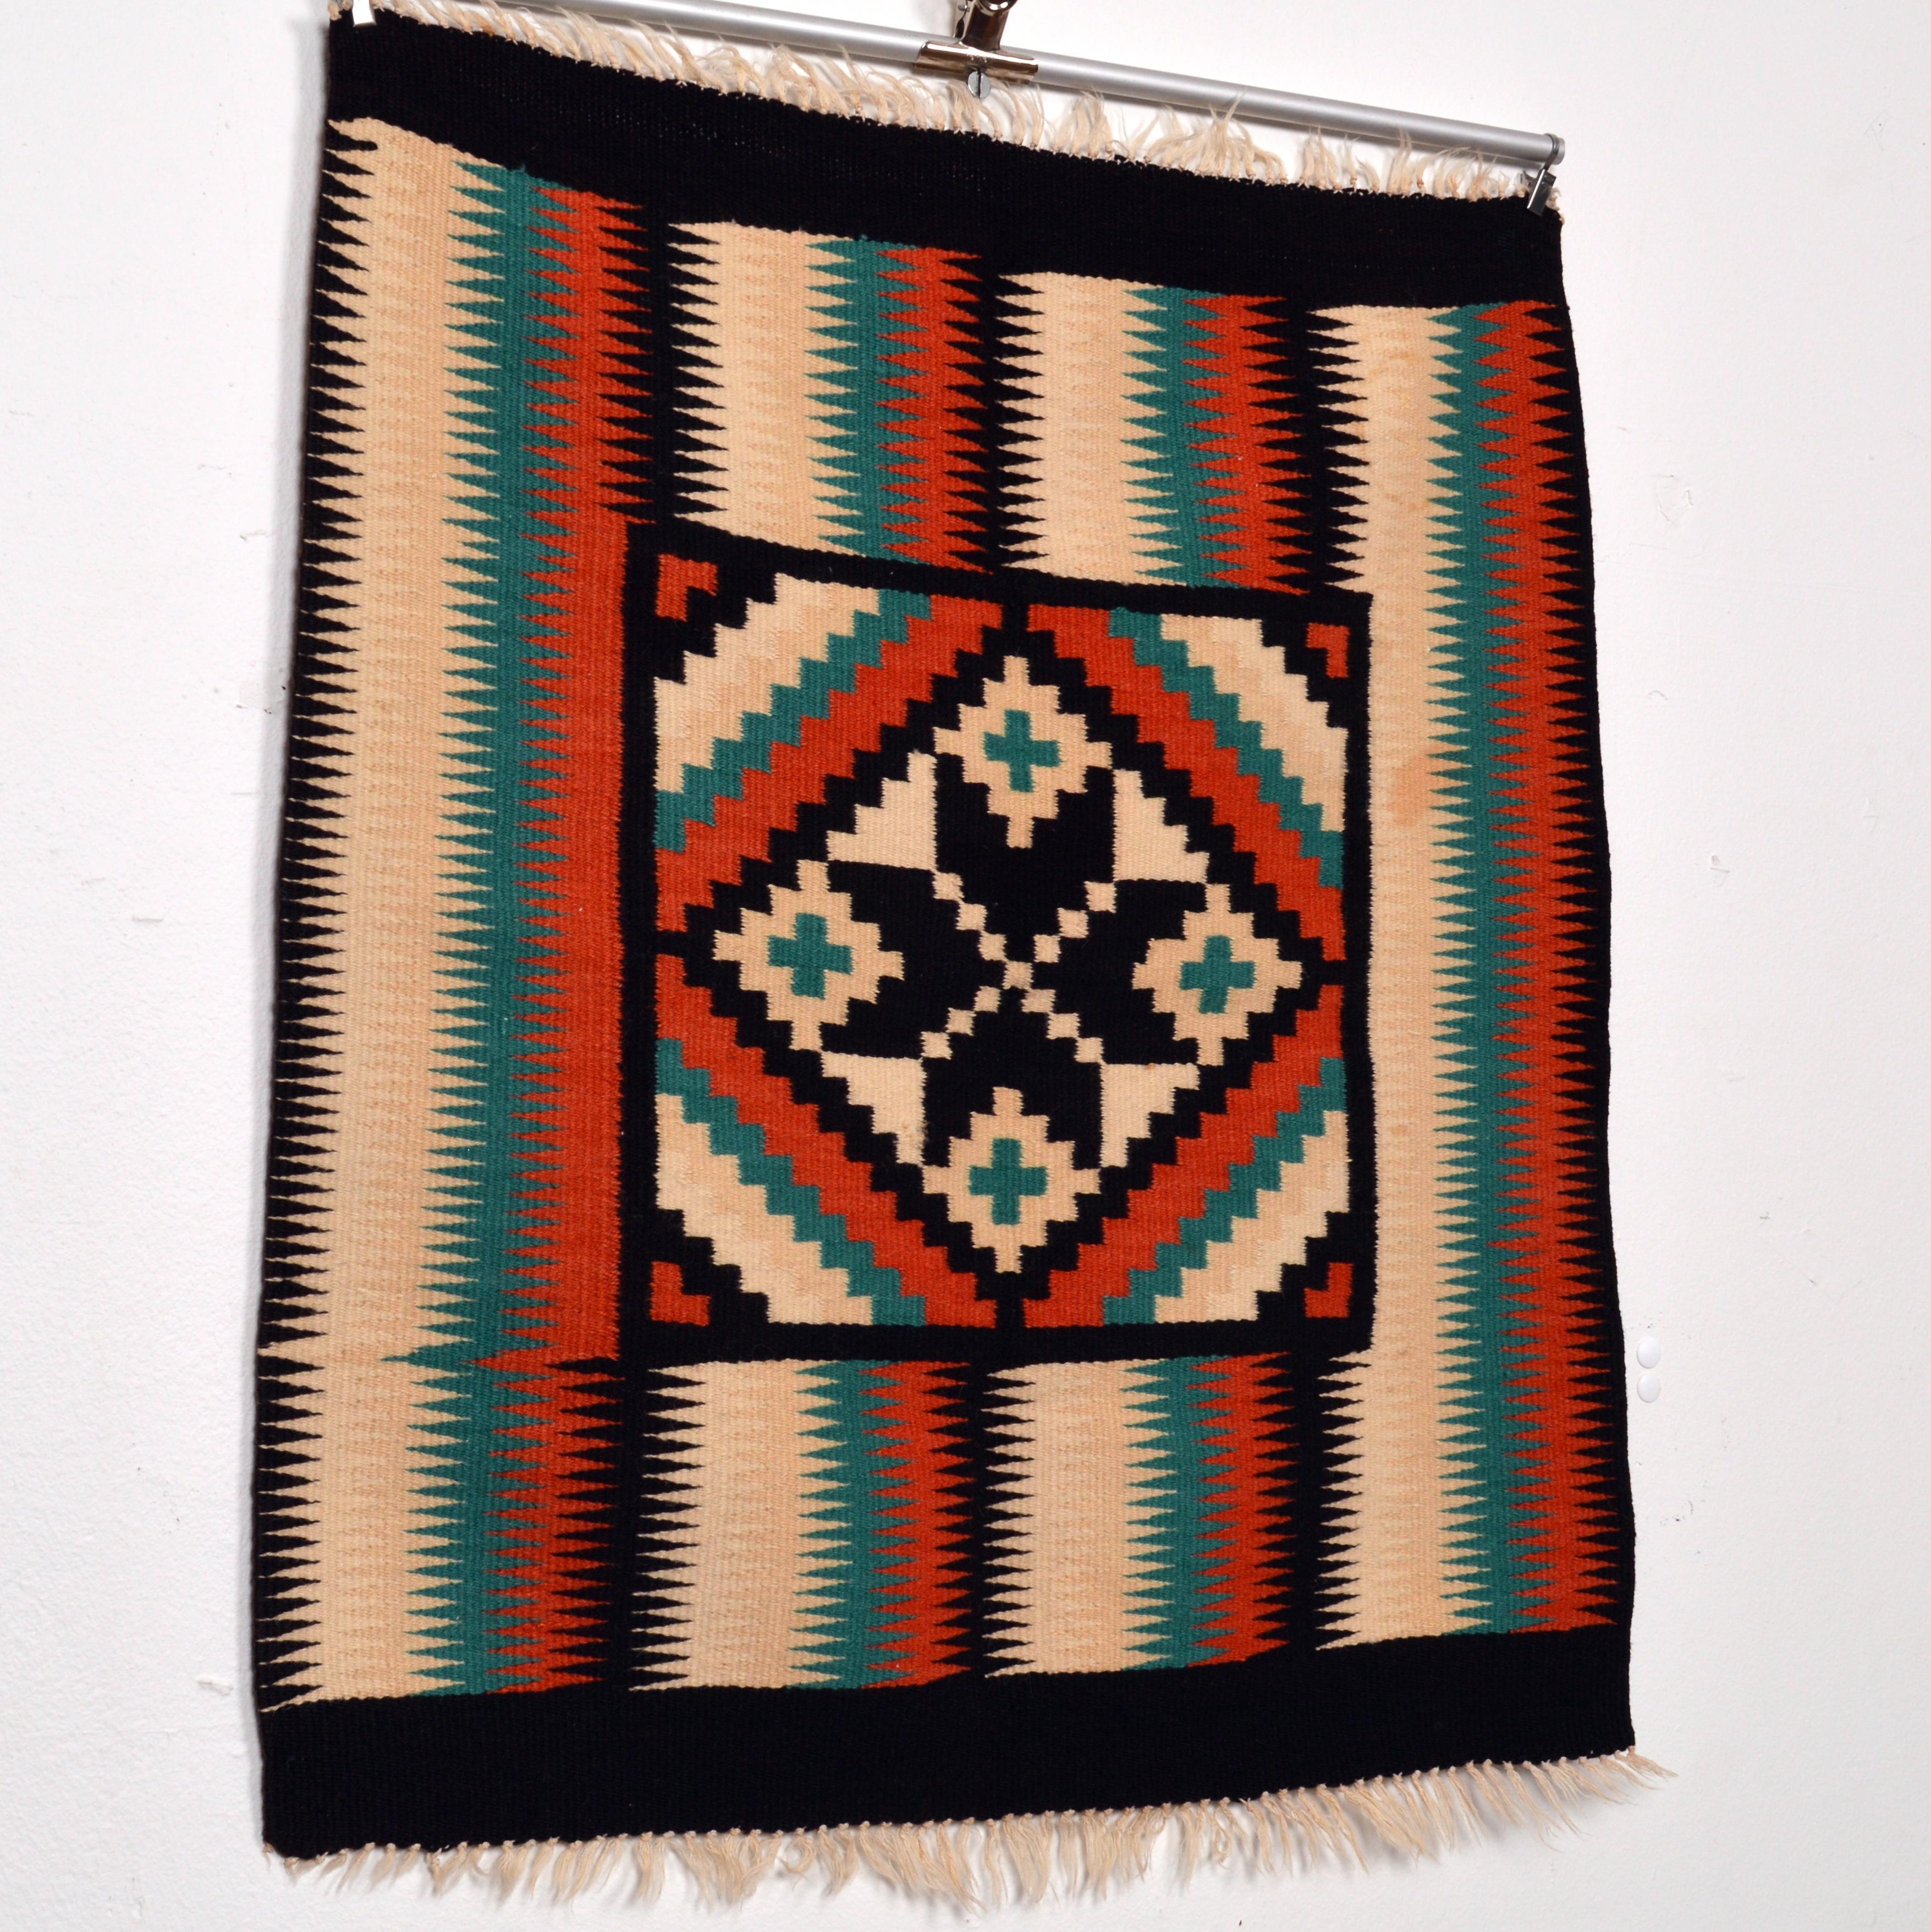 Beautiful little tapestry / wall hanging or table decoration with a geometrical Navajo design pattern. Woven with wool on cotton. Very good vintage condition. Dimensions excludes the fringes.
 